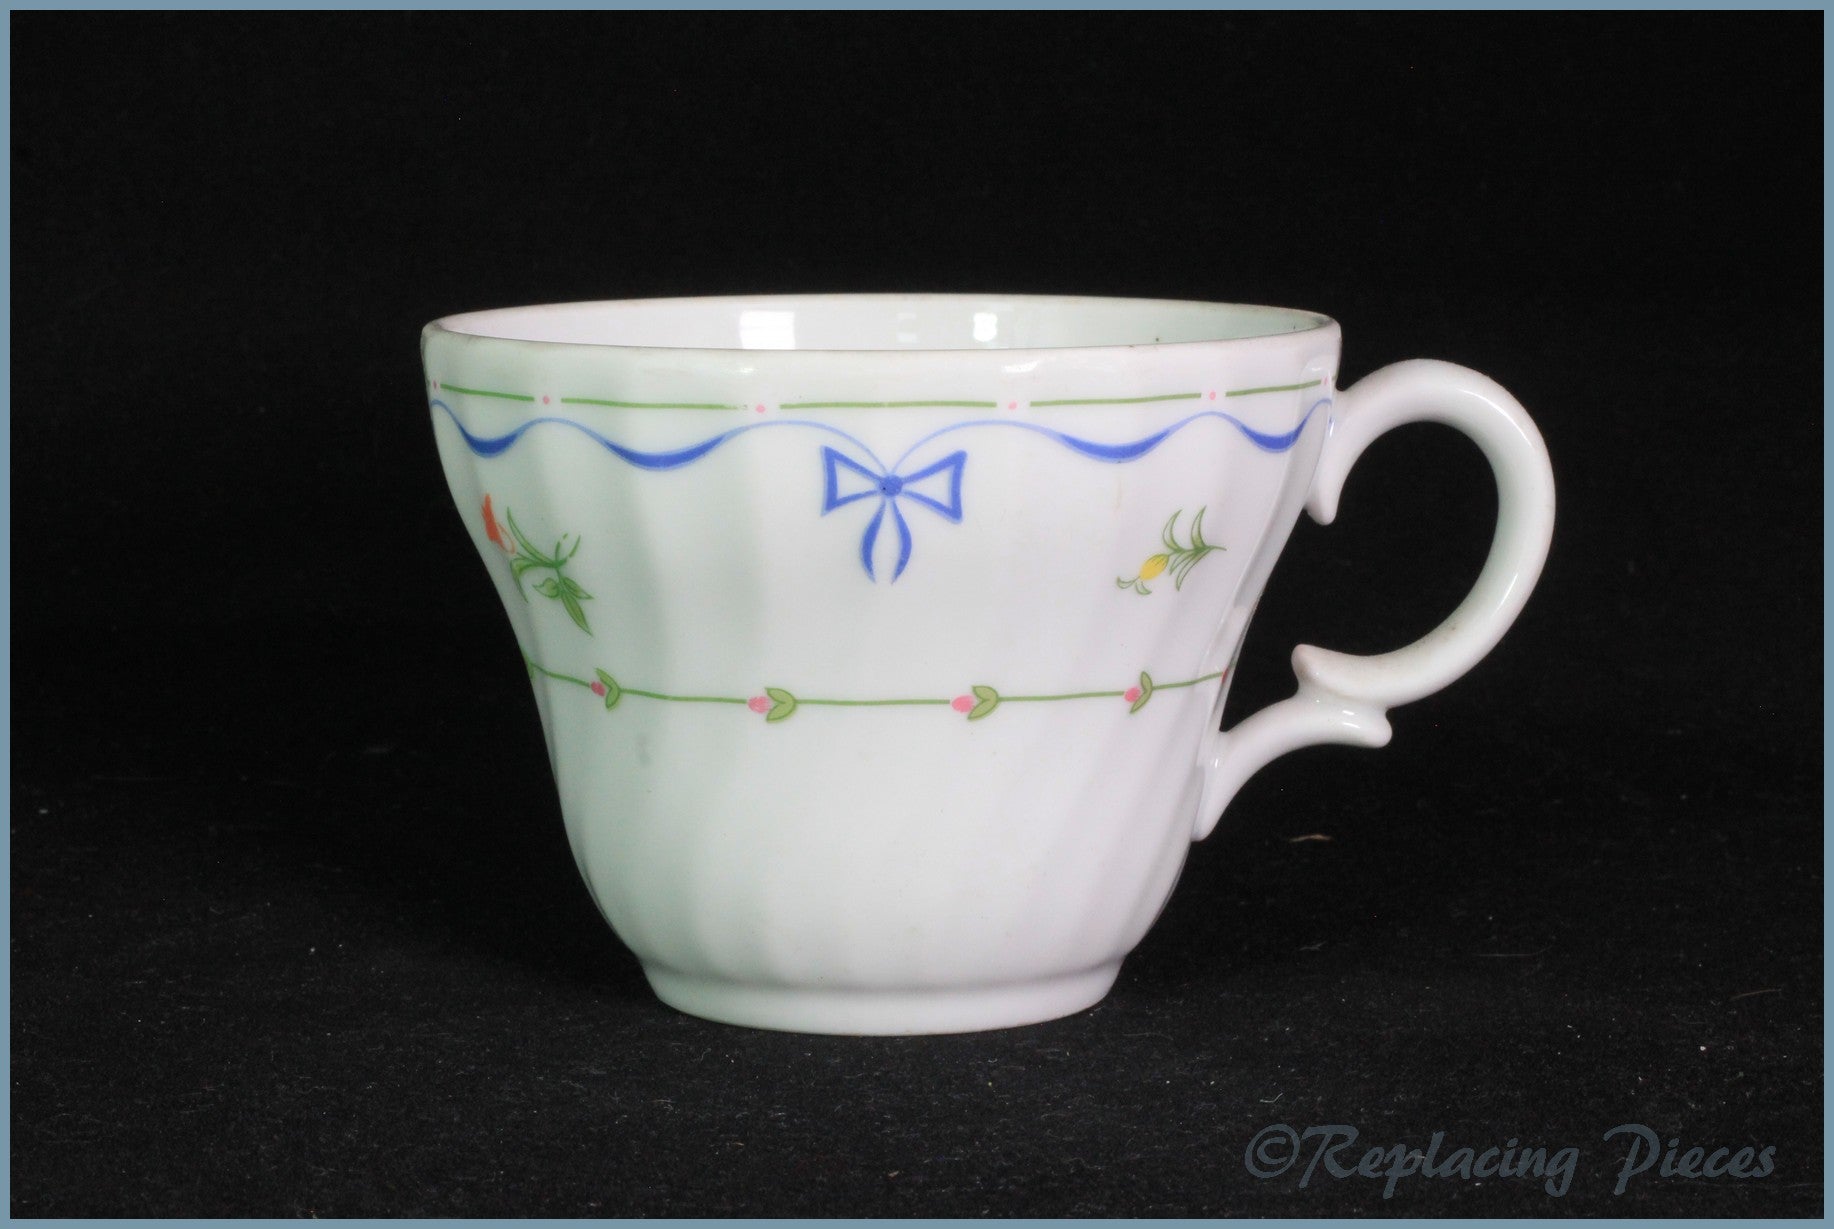 Royal Worcester - Ribbons & Bows - Teacup